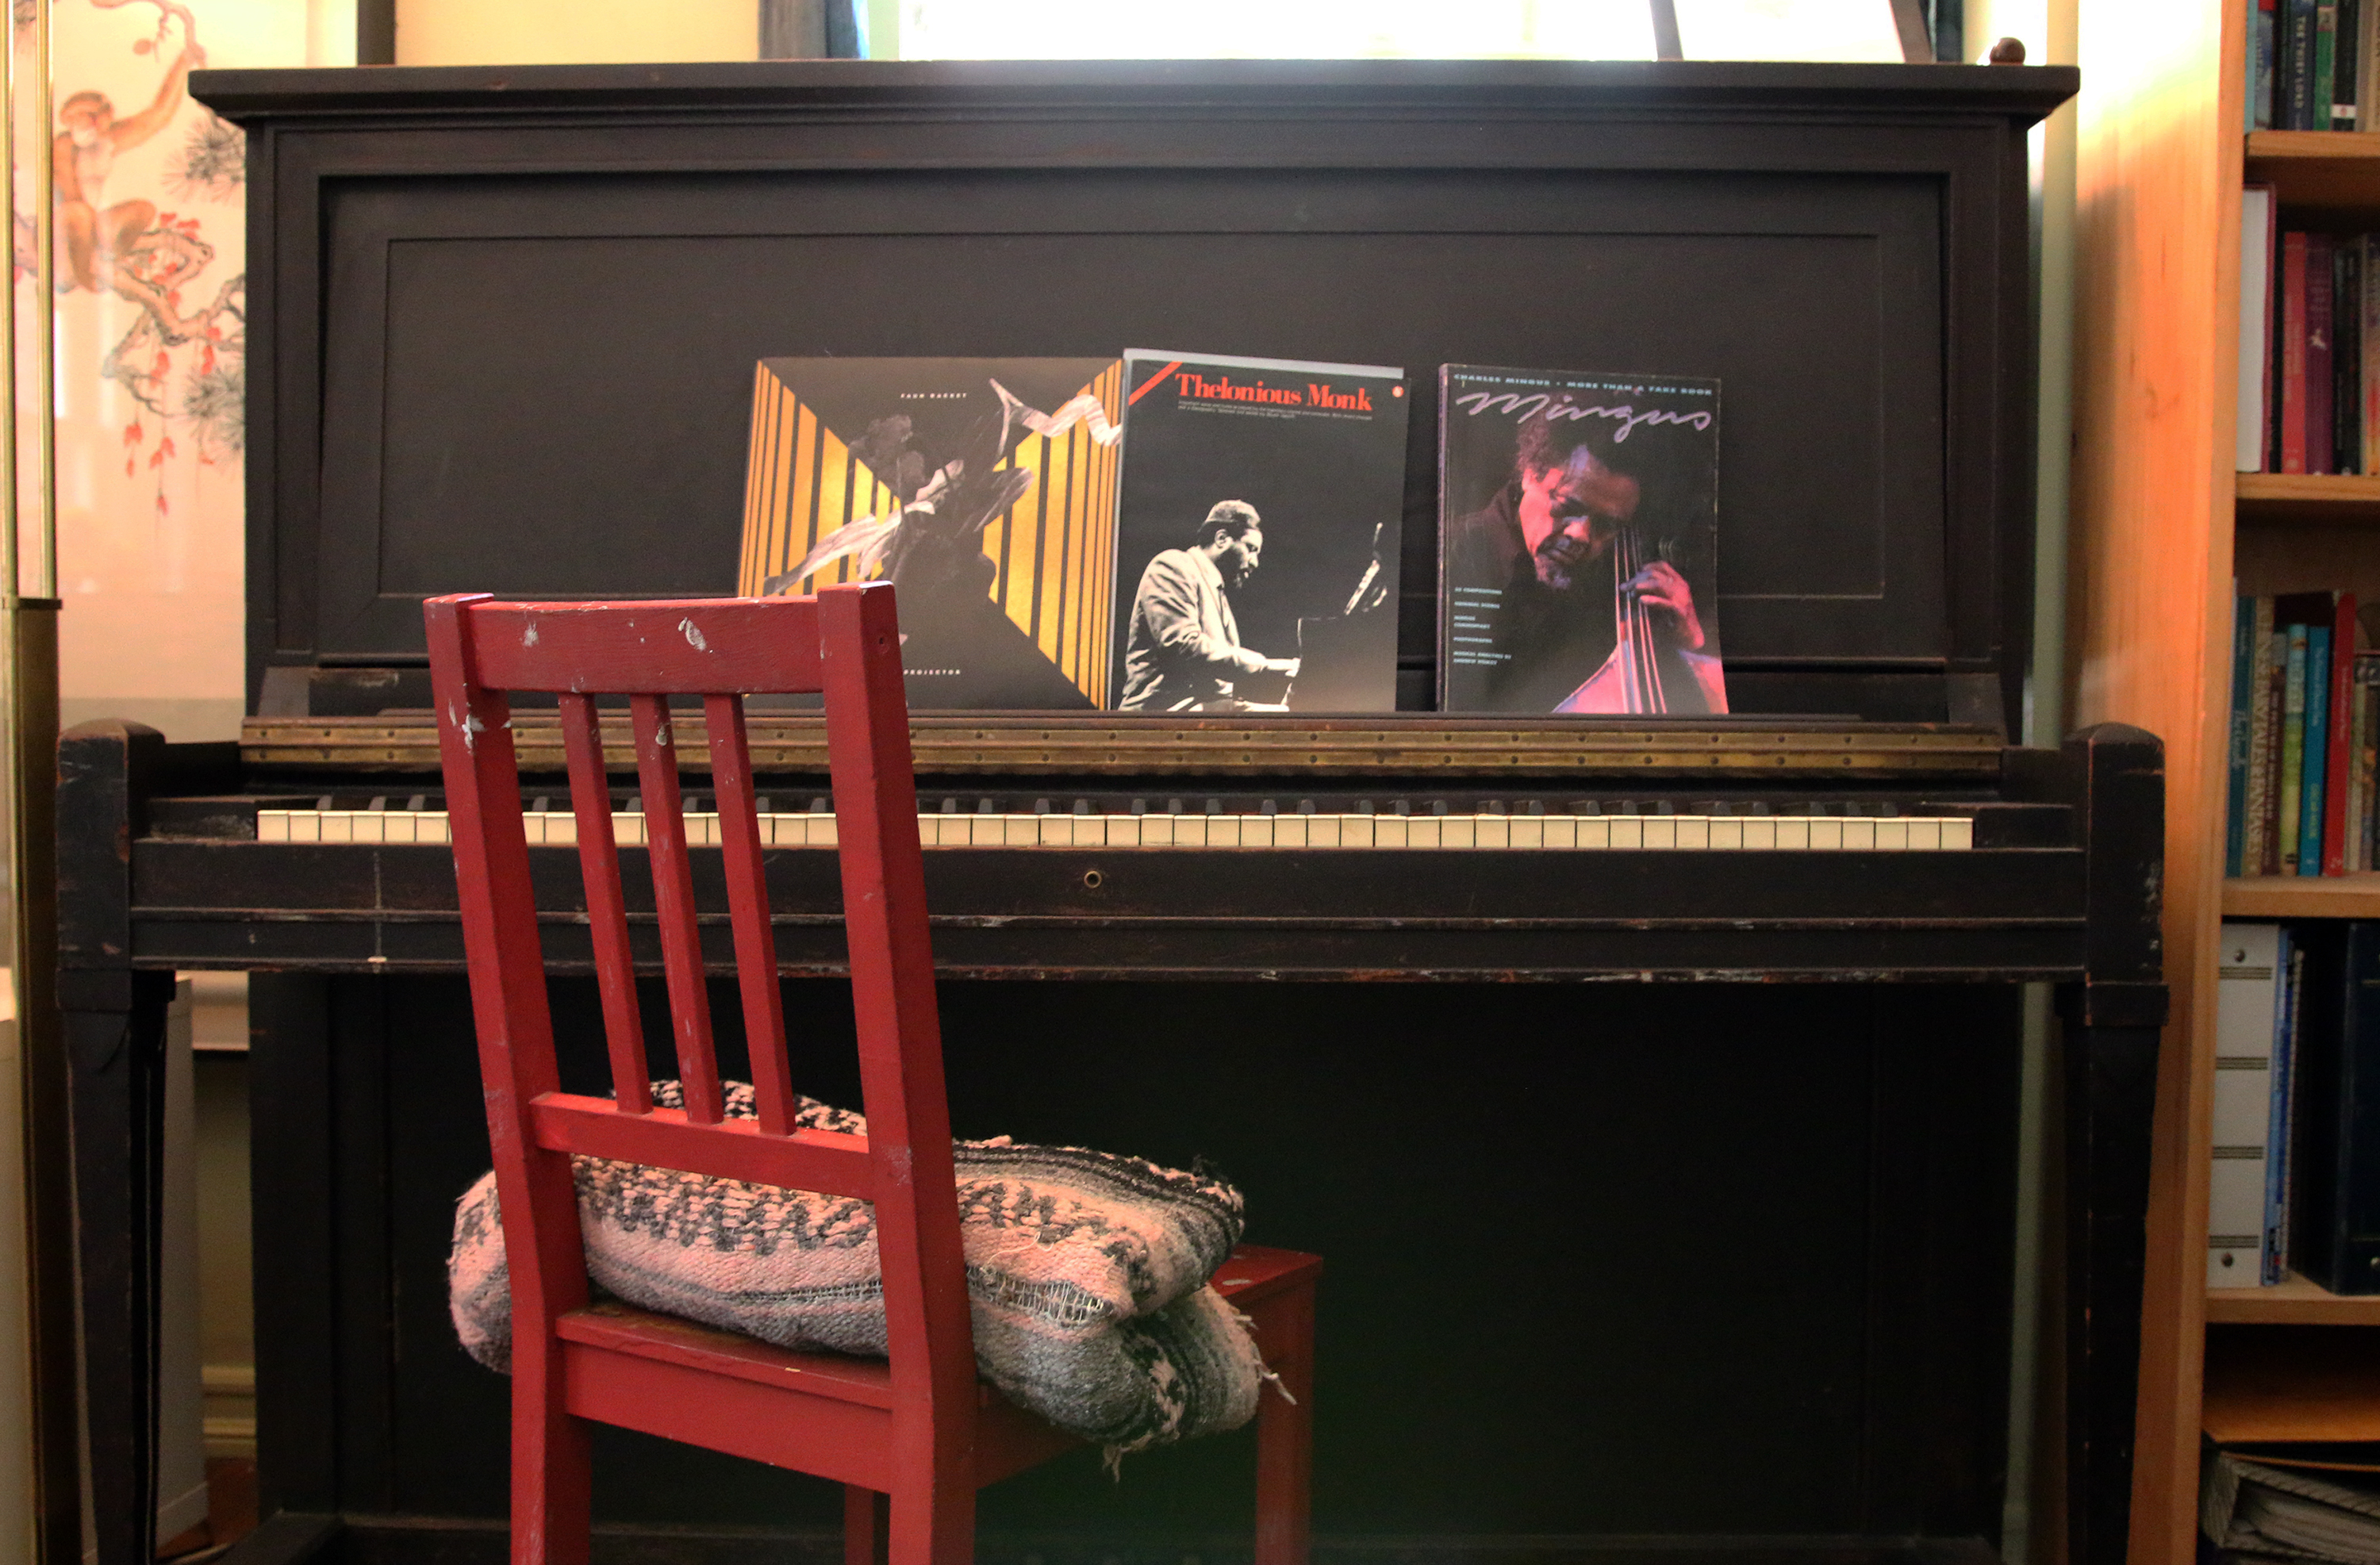 The upright piano in John King's apartment which has books of scores by Thelonious Monk and Charles Mingus.